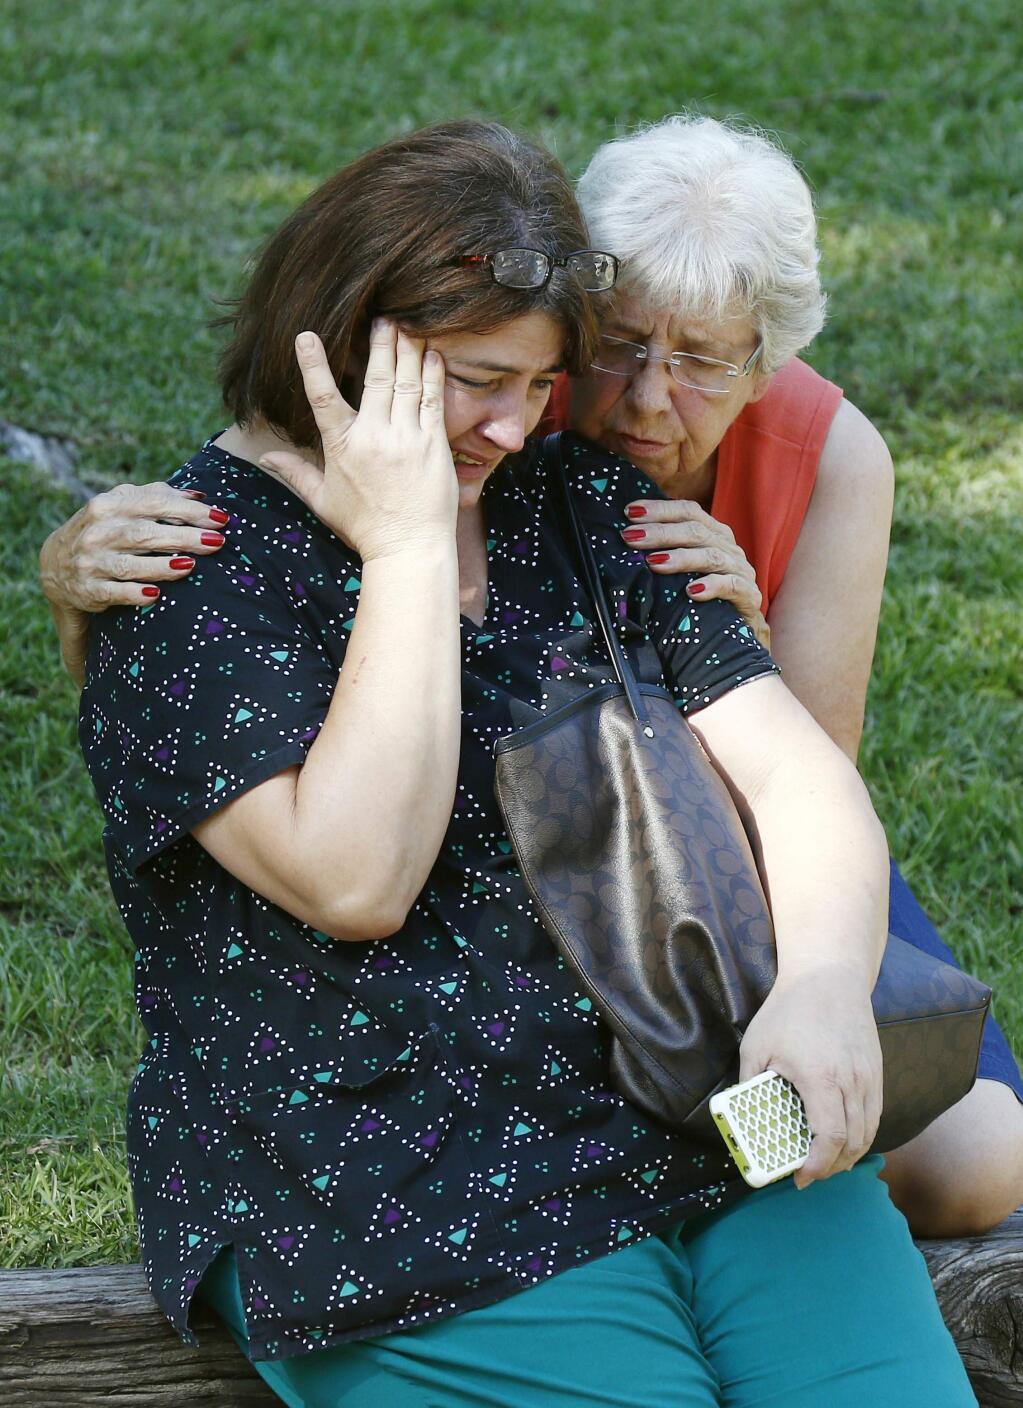 Jonell Payton, right, comforts Lisa Dew, outside the Durant, Miss., home of two slain Catholic nuns, Thursday, Aug. 25, 2016. The nuns worked as nurses at the Lexington Medical Clinic, where Dew was the office manager. Dew and a Durant police officer discovered their bodies inside the house after both nuns did not report for work. (AP Photo/Rogelio V. Solis)